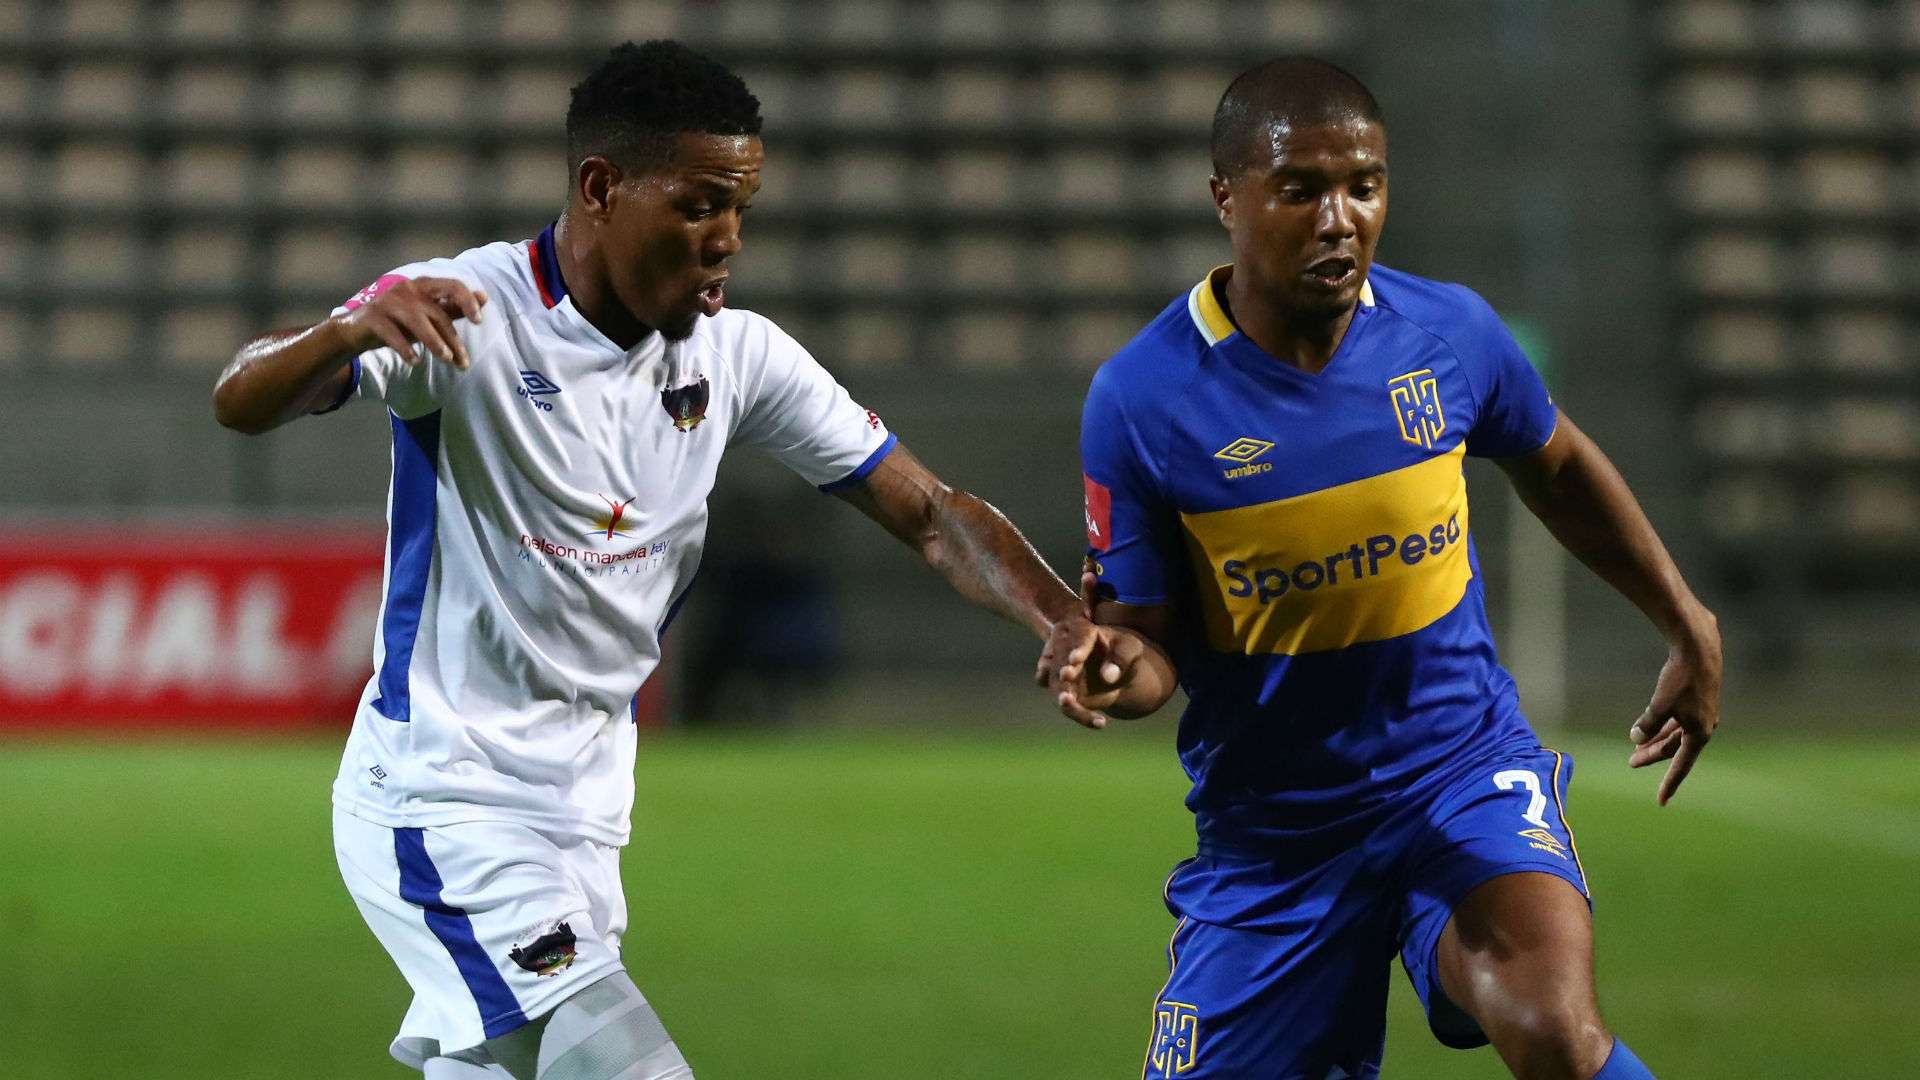 Lyle Lakay of Cape Town City evades challenge from Sizwe Mdlinzo of Chippa United